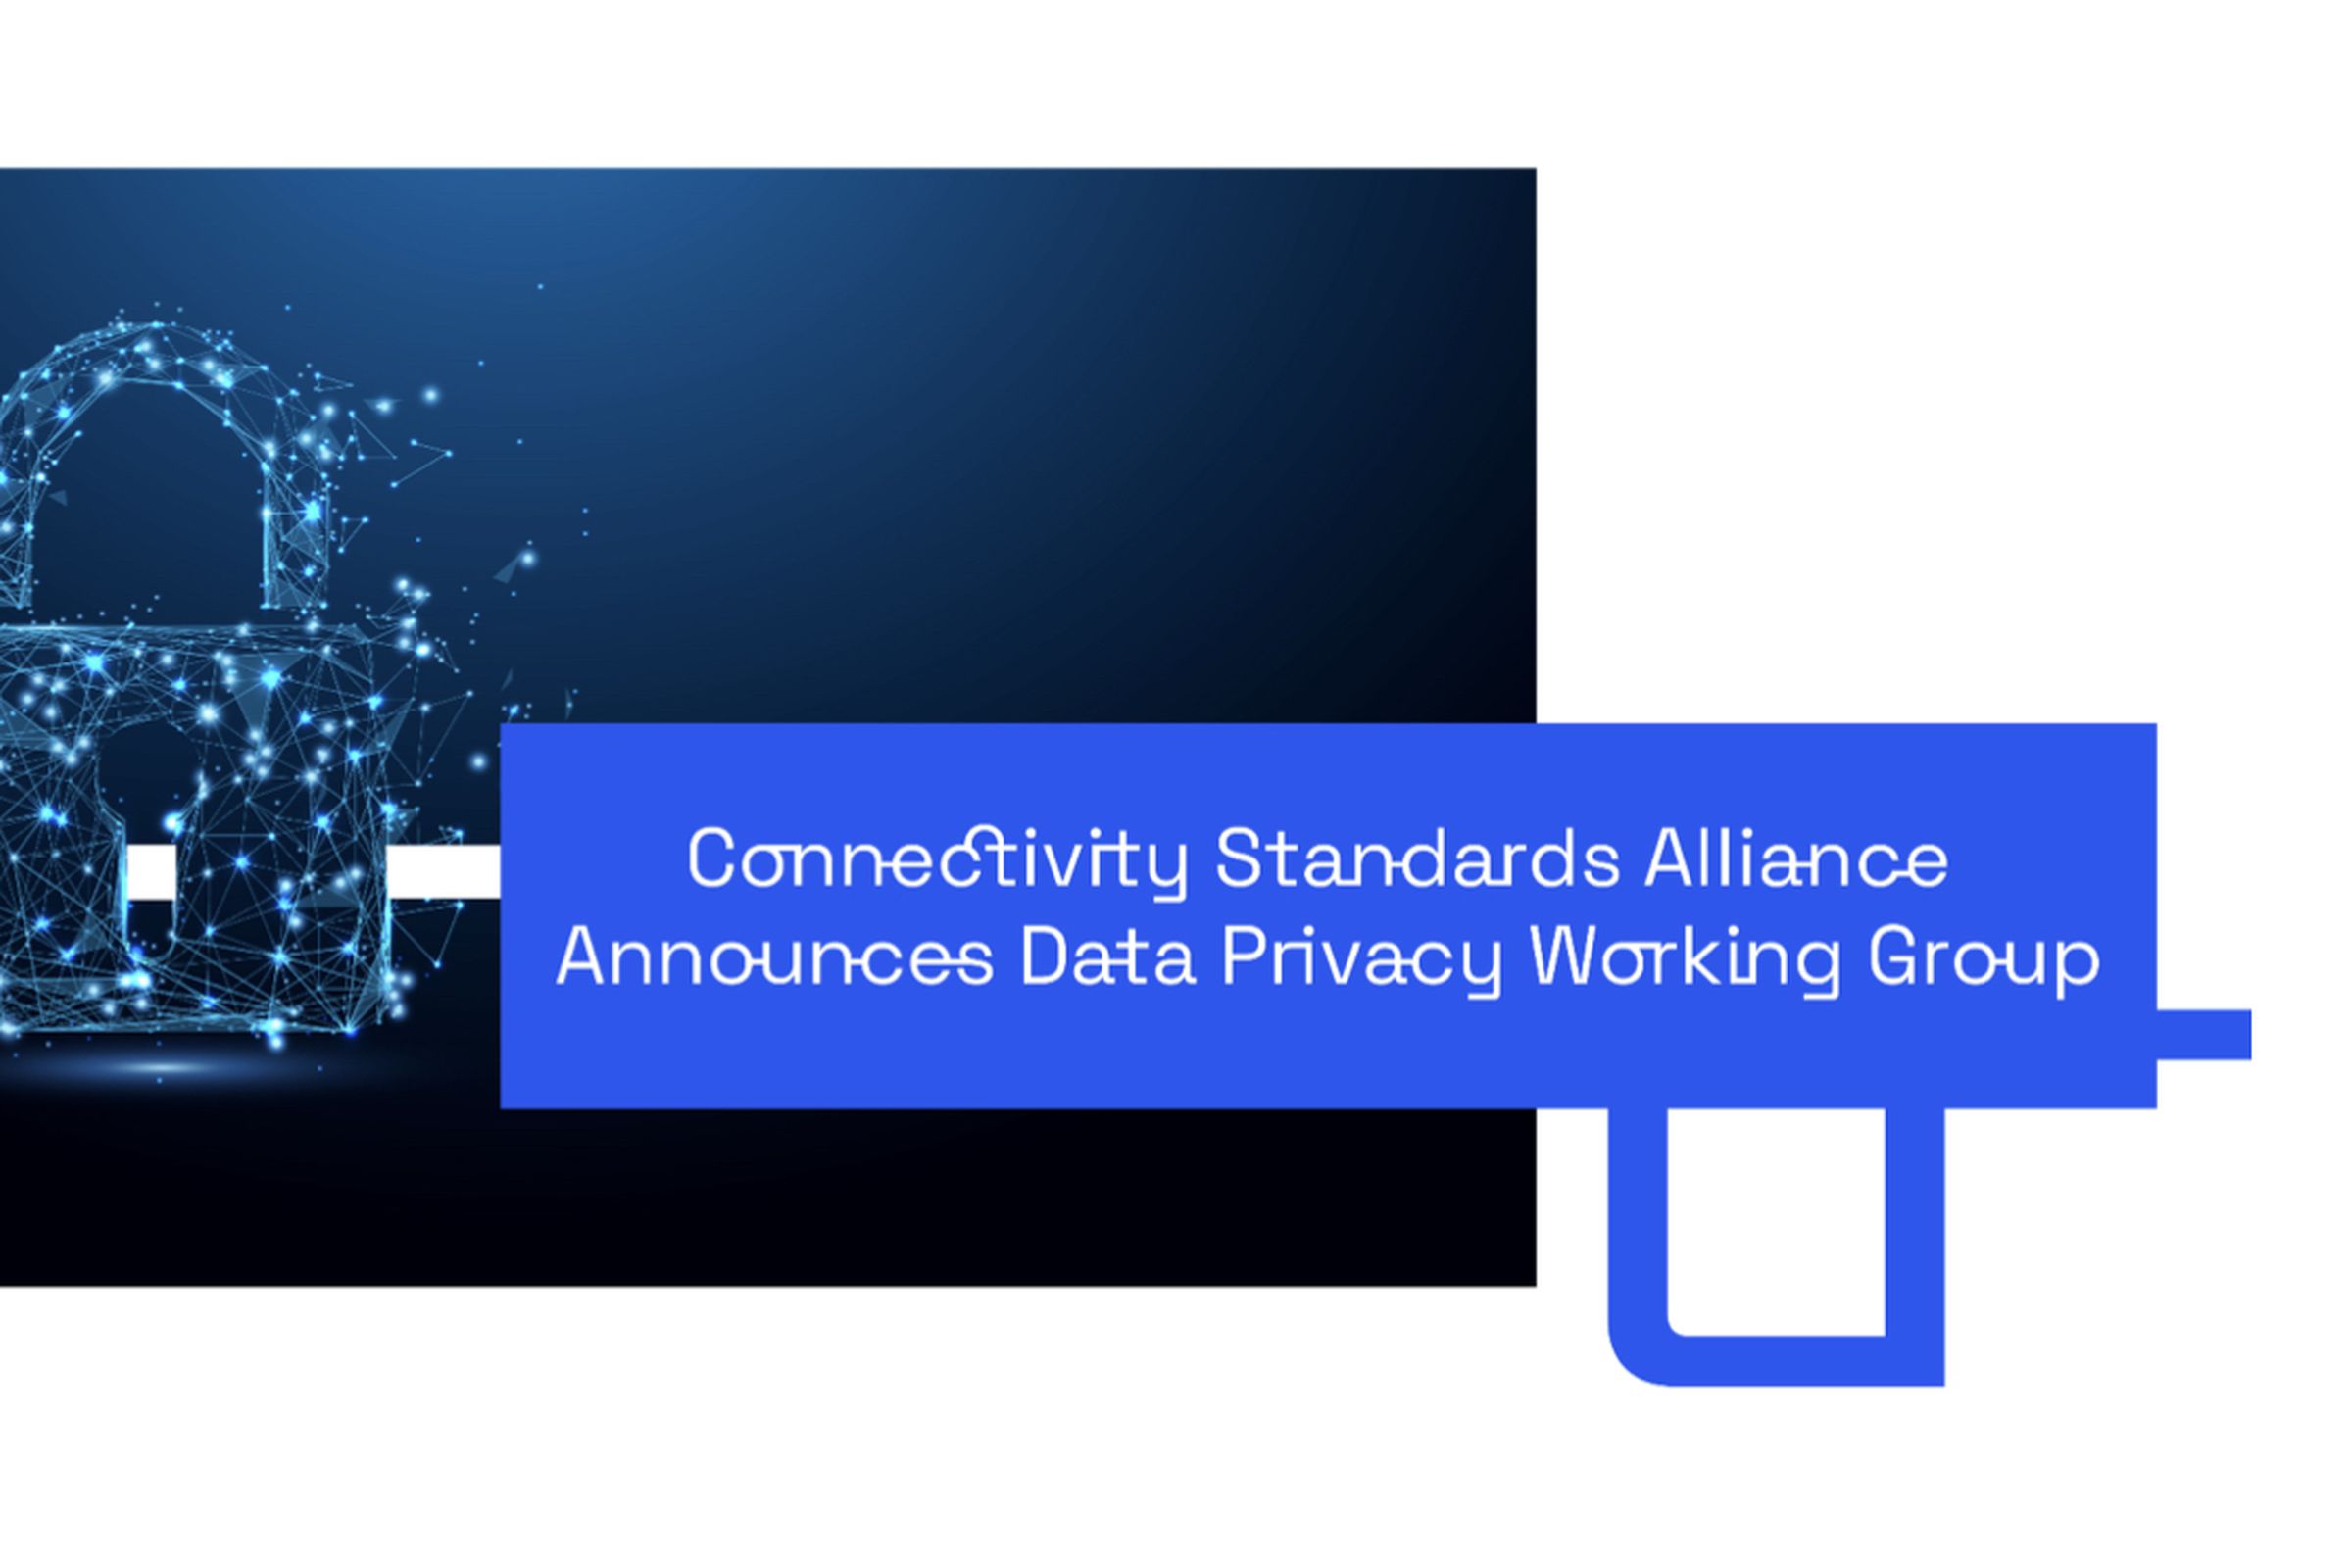 Image from CSA data privacy working group announcement depicting a stylized padlock and the words “Connectivity Standards Alliance Announces Data Privacy Working Group.”